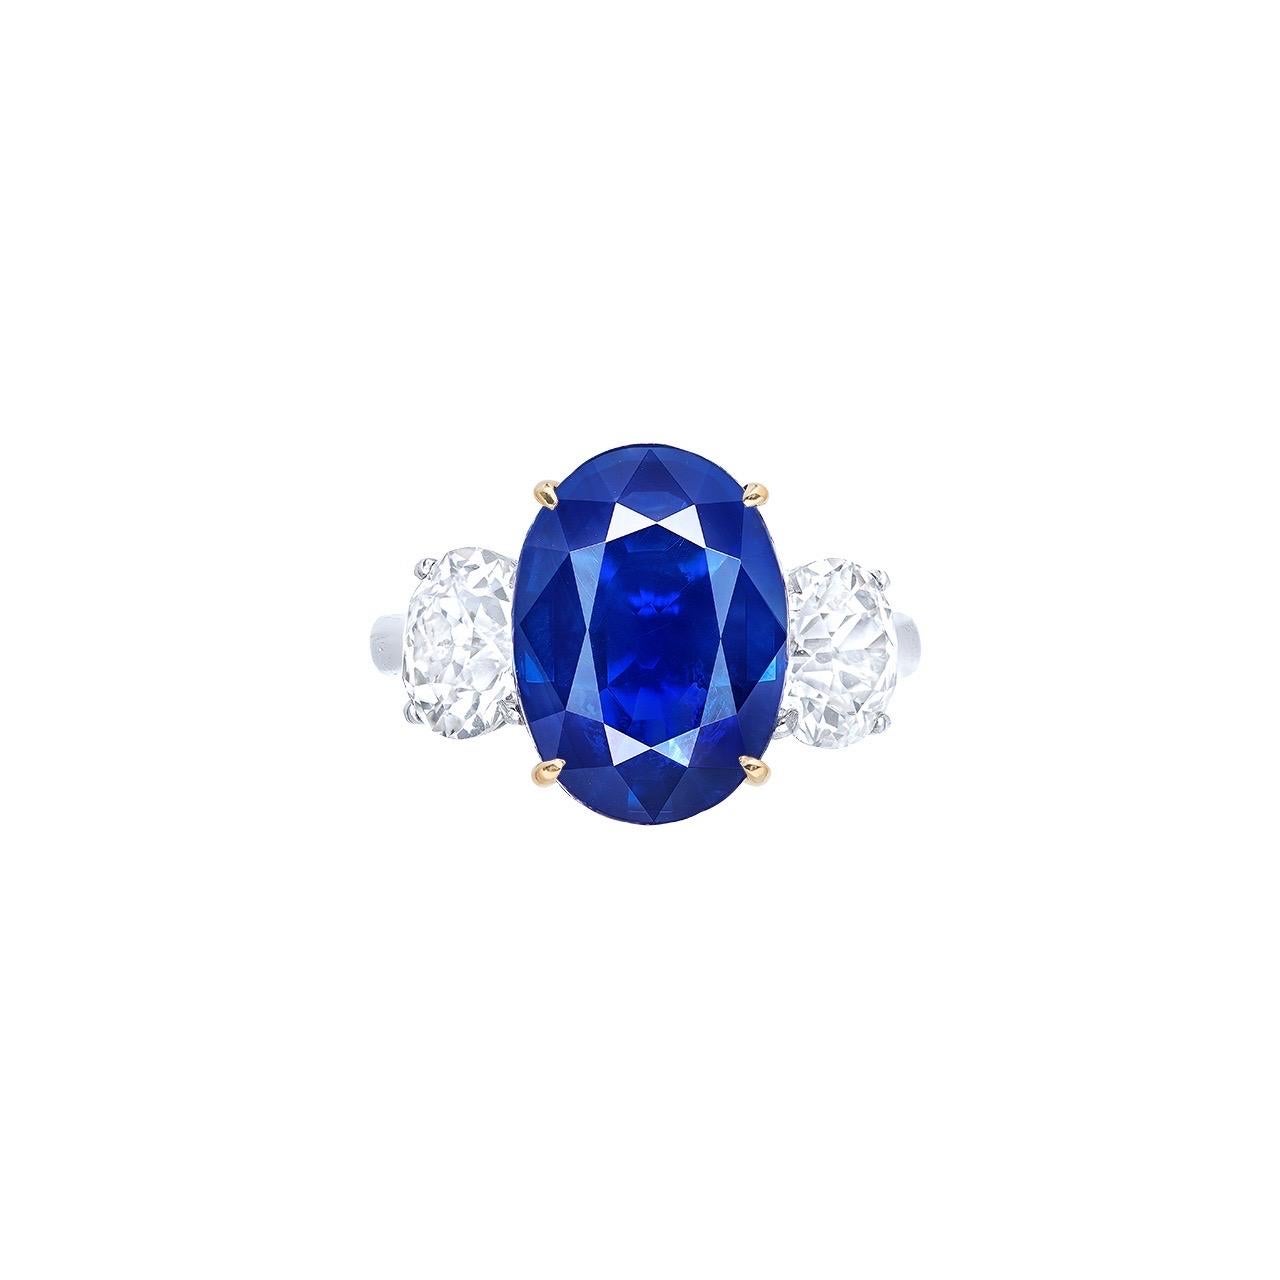 From the Museum Vault at Emilio Jewelry located on New York's iconic Fifth Avenue, 
A chance to own the Mona Lisa of Sapphires, a Kashmir. 
Center Stone: AGL and SSEF certified Kashmir royal blue unheated sapphire just over 5 carats 
Matching